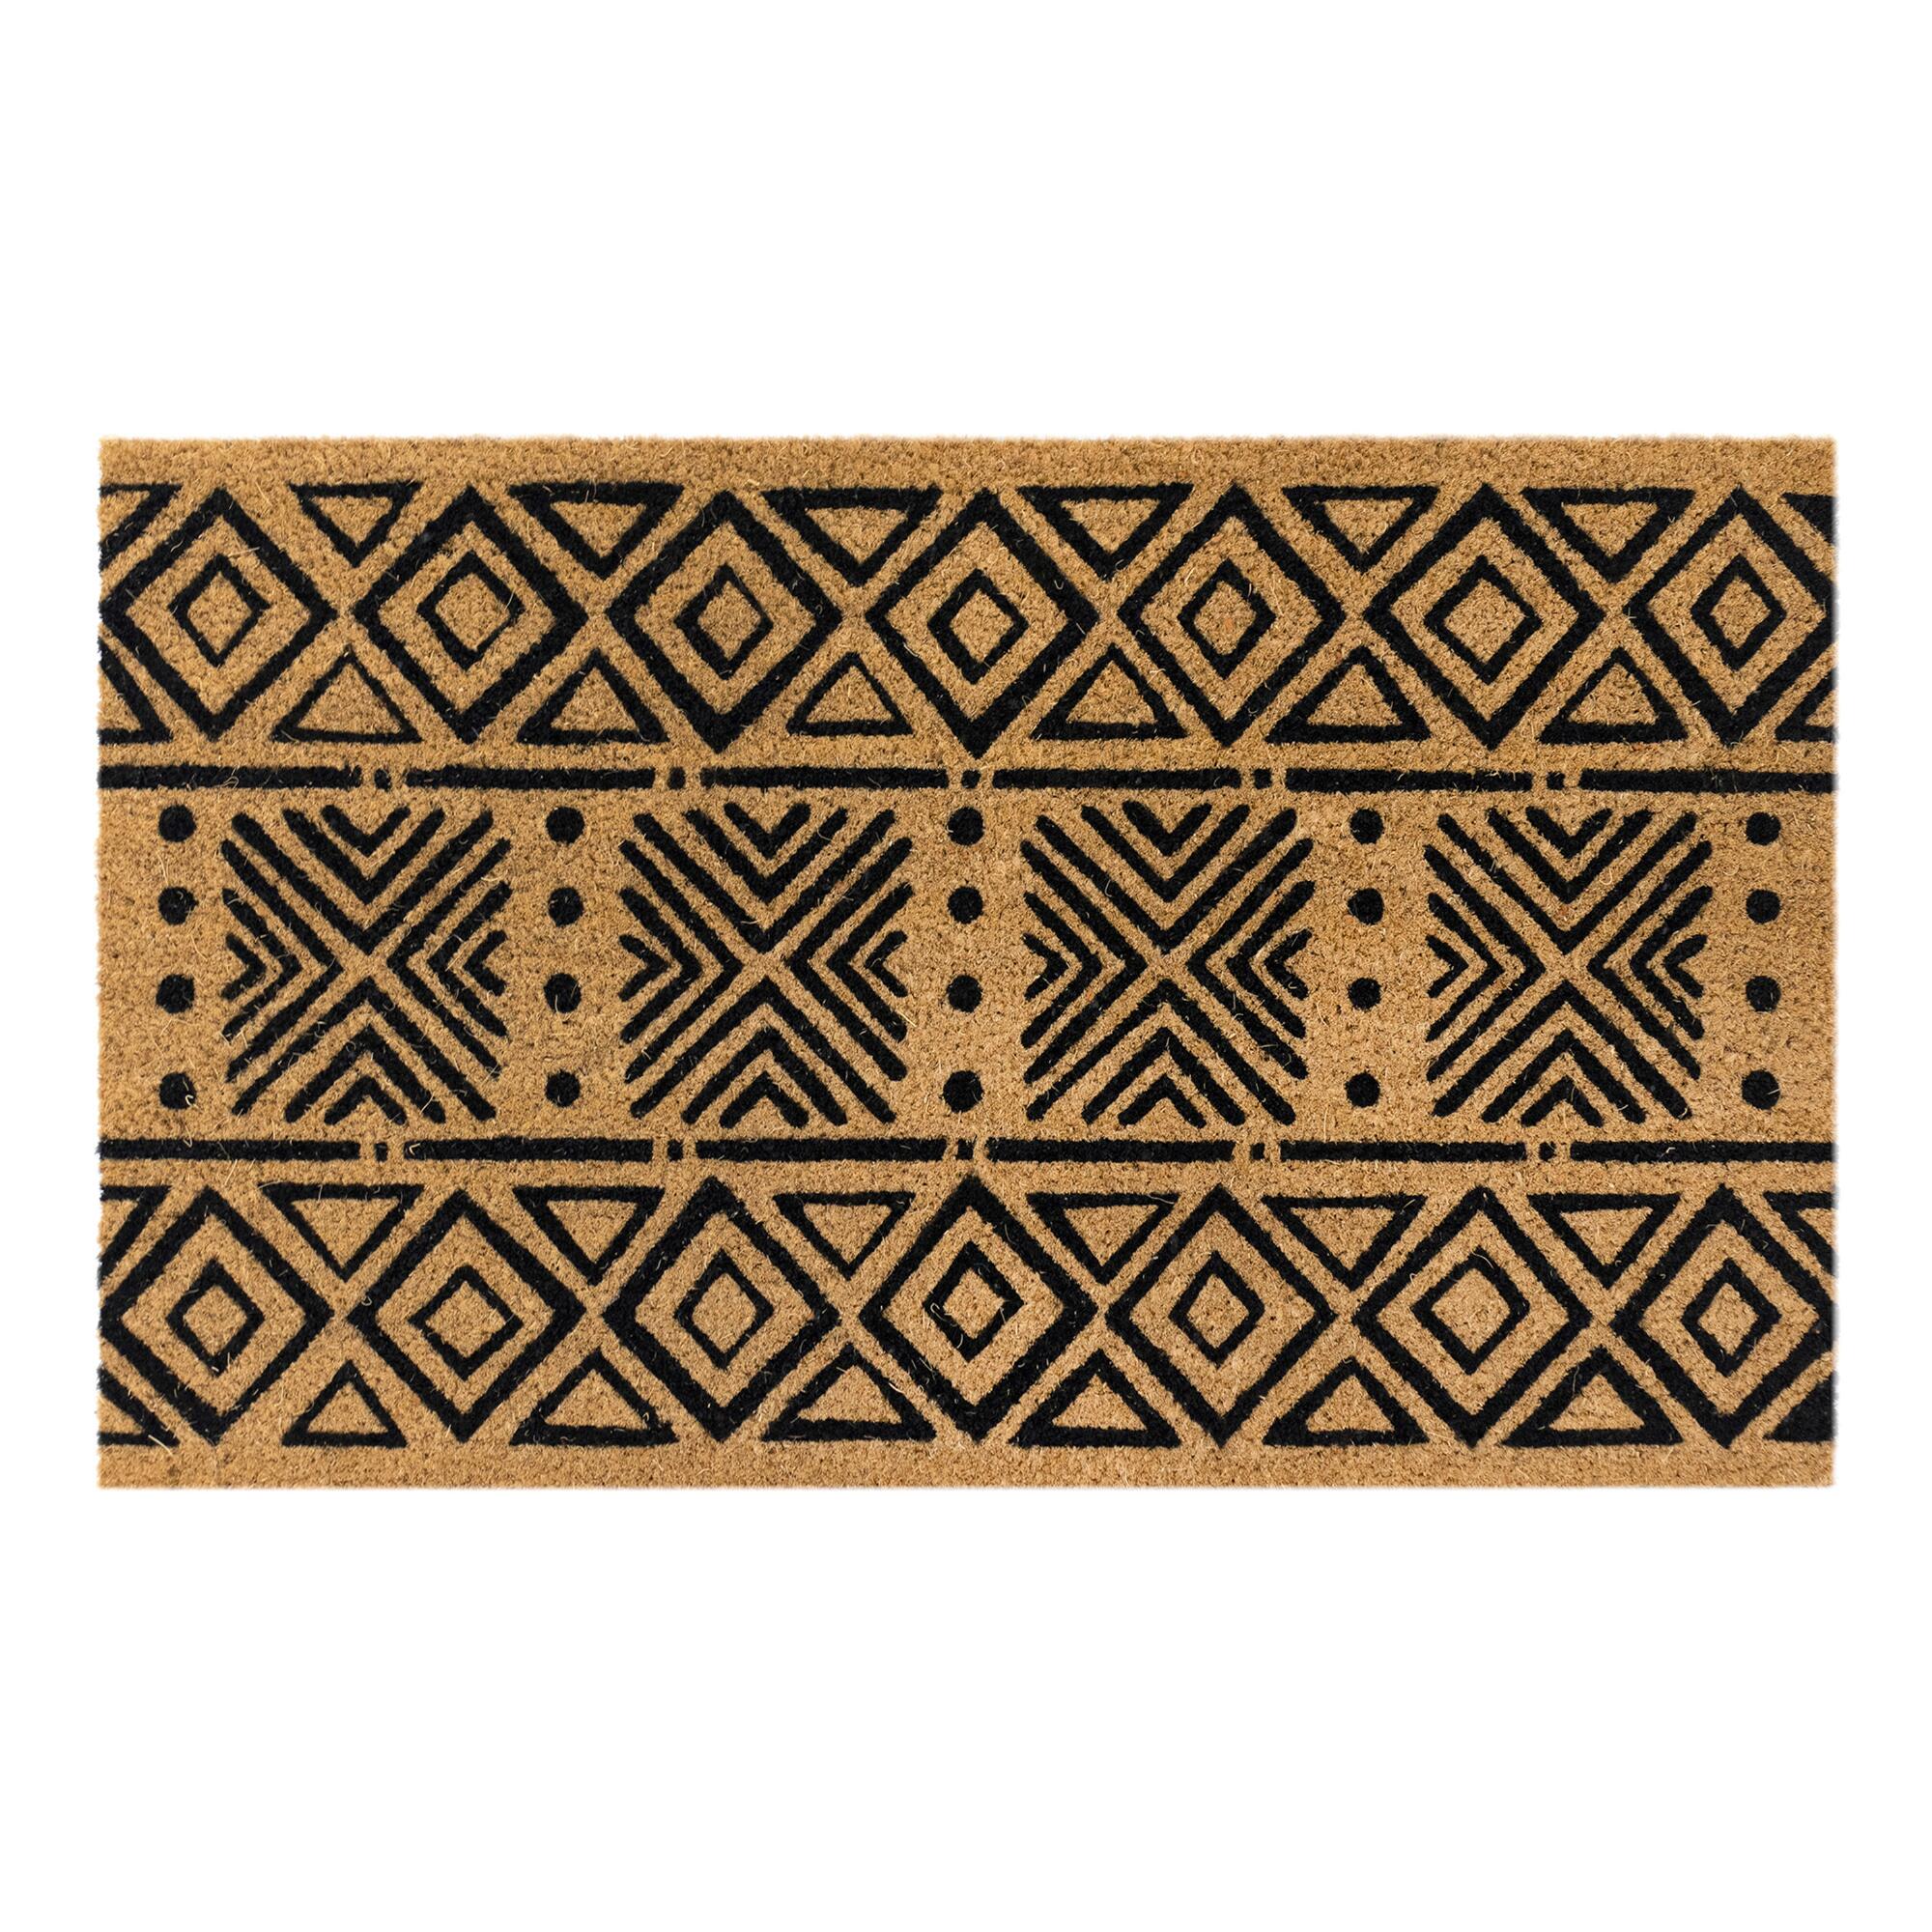 Natural And Black Geometric Mud Cloth Coir Doormat by World Market